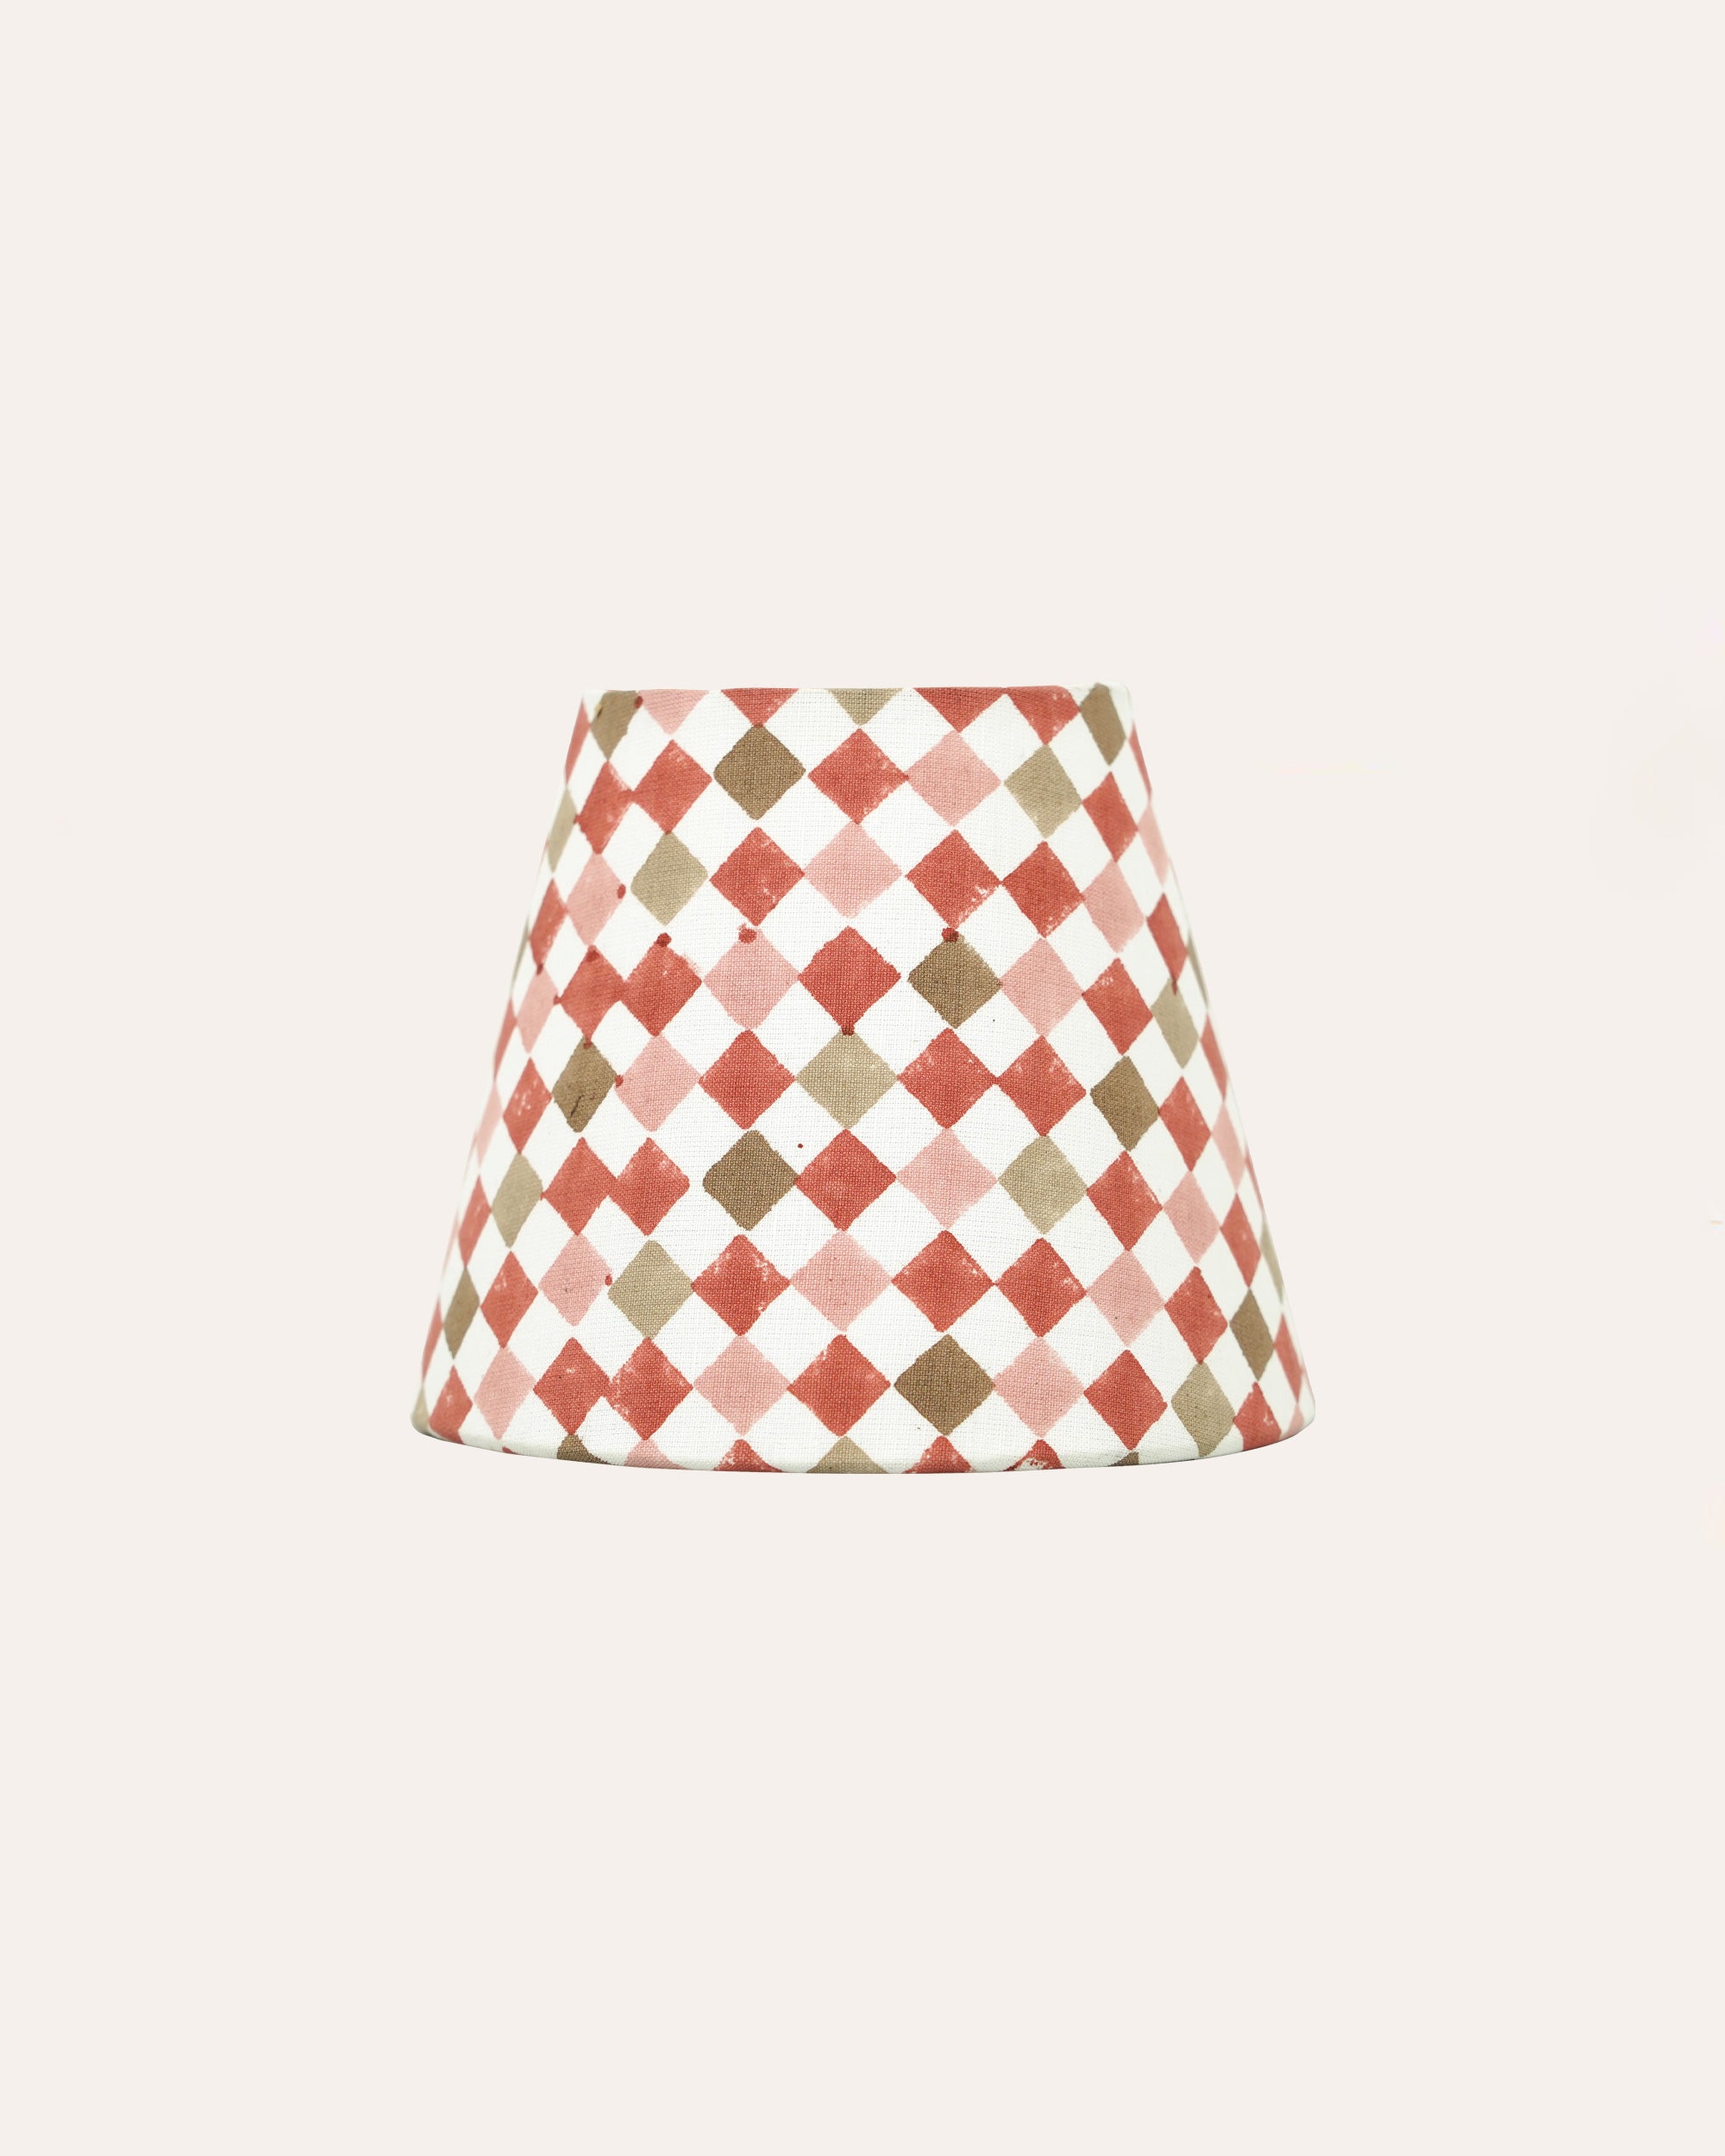 Azulejo Candle Lampshade - Red and Taupe